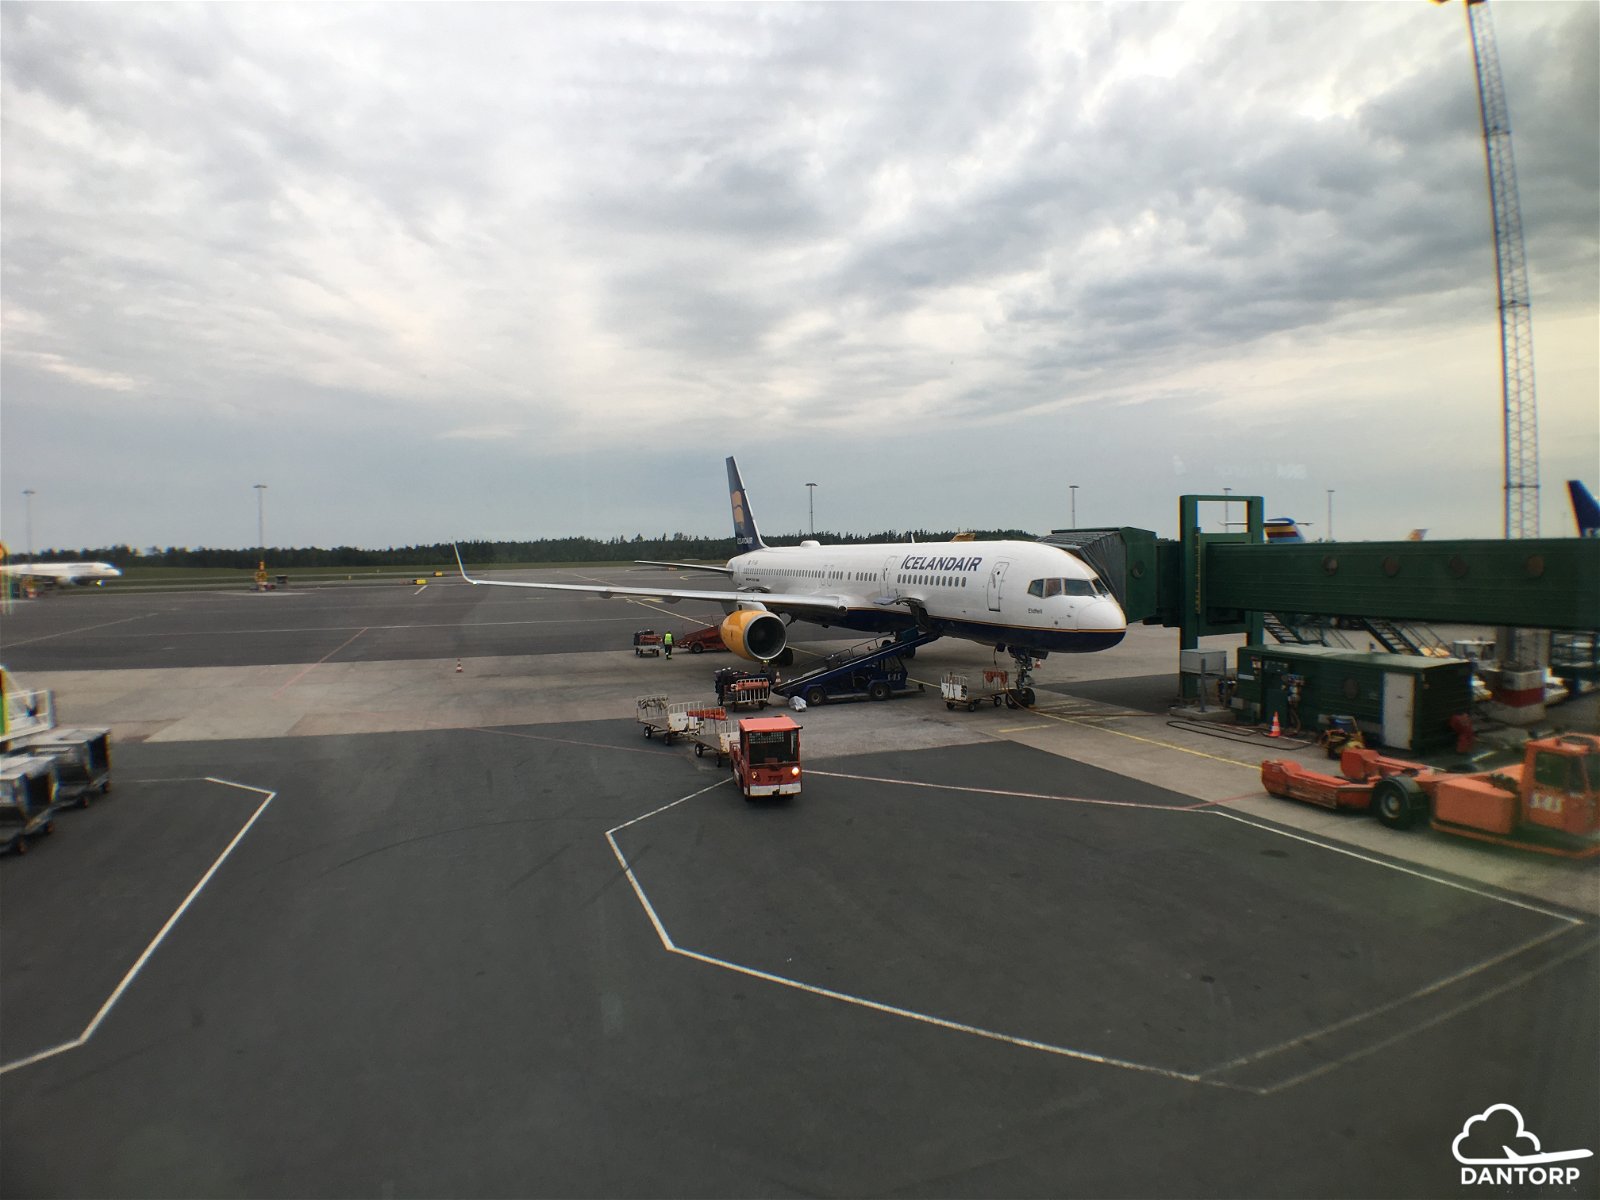 My aircraft for today - an Icelandair 757-200.